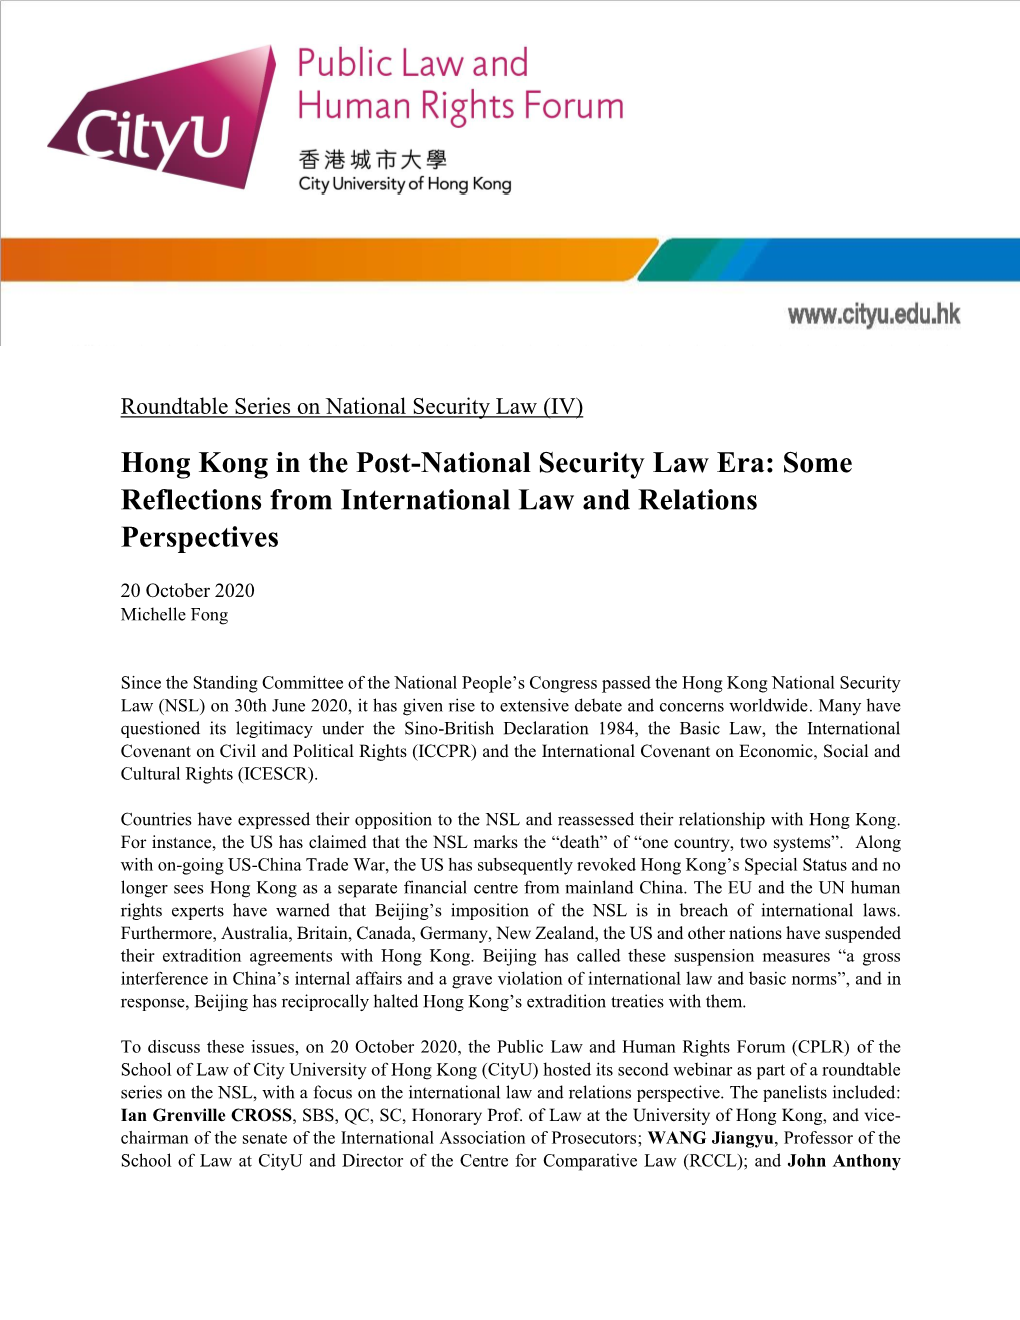 Hong Kong in the Post-National Security Law Era: Some Reflections from International Law and Relations Perspectives